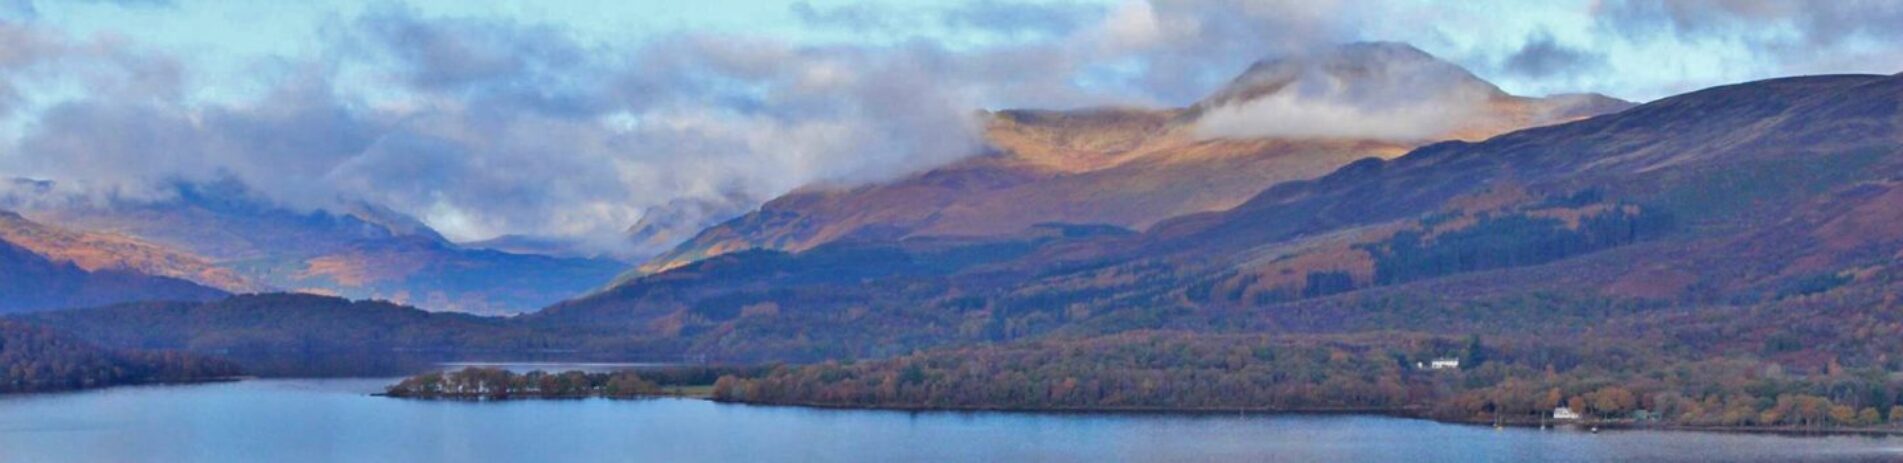 panorama-of-loch-lomond-with-ben-lomond-partly-covered-by-clouds-towering-on-the-right